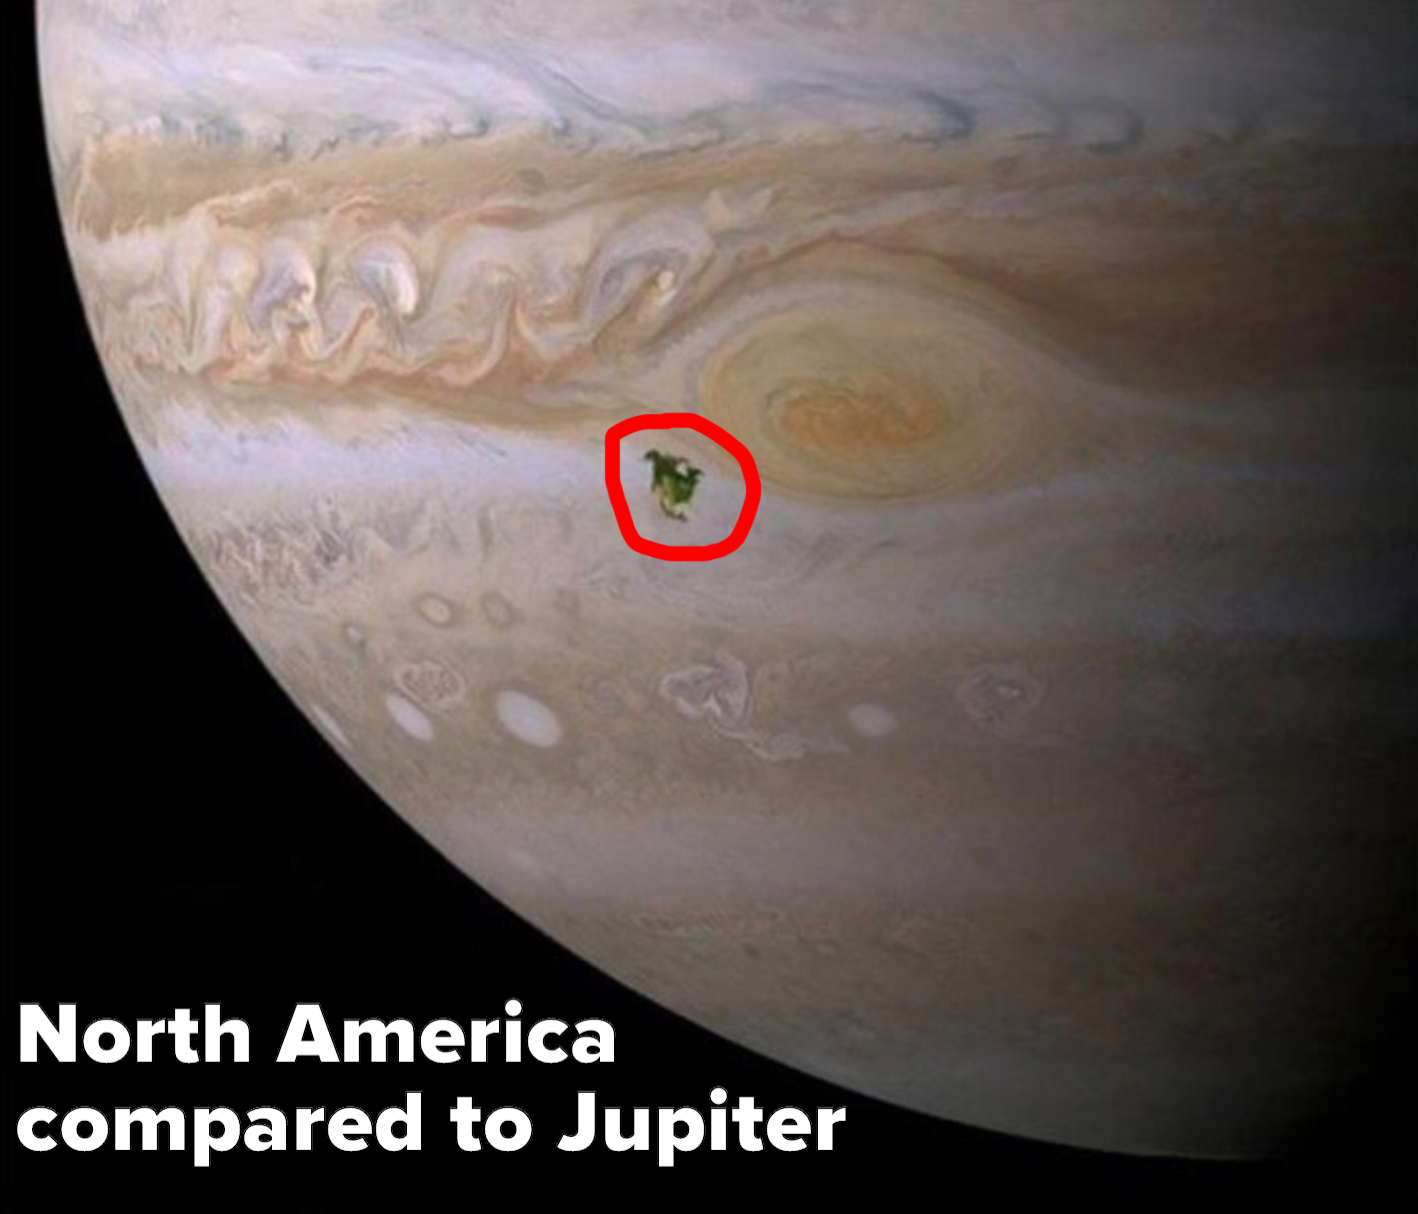 Image showing the size of North America in comparison to Jupiter